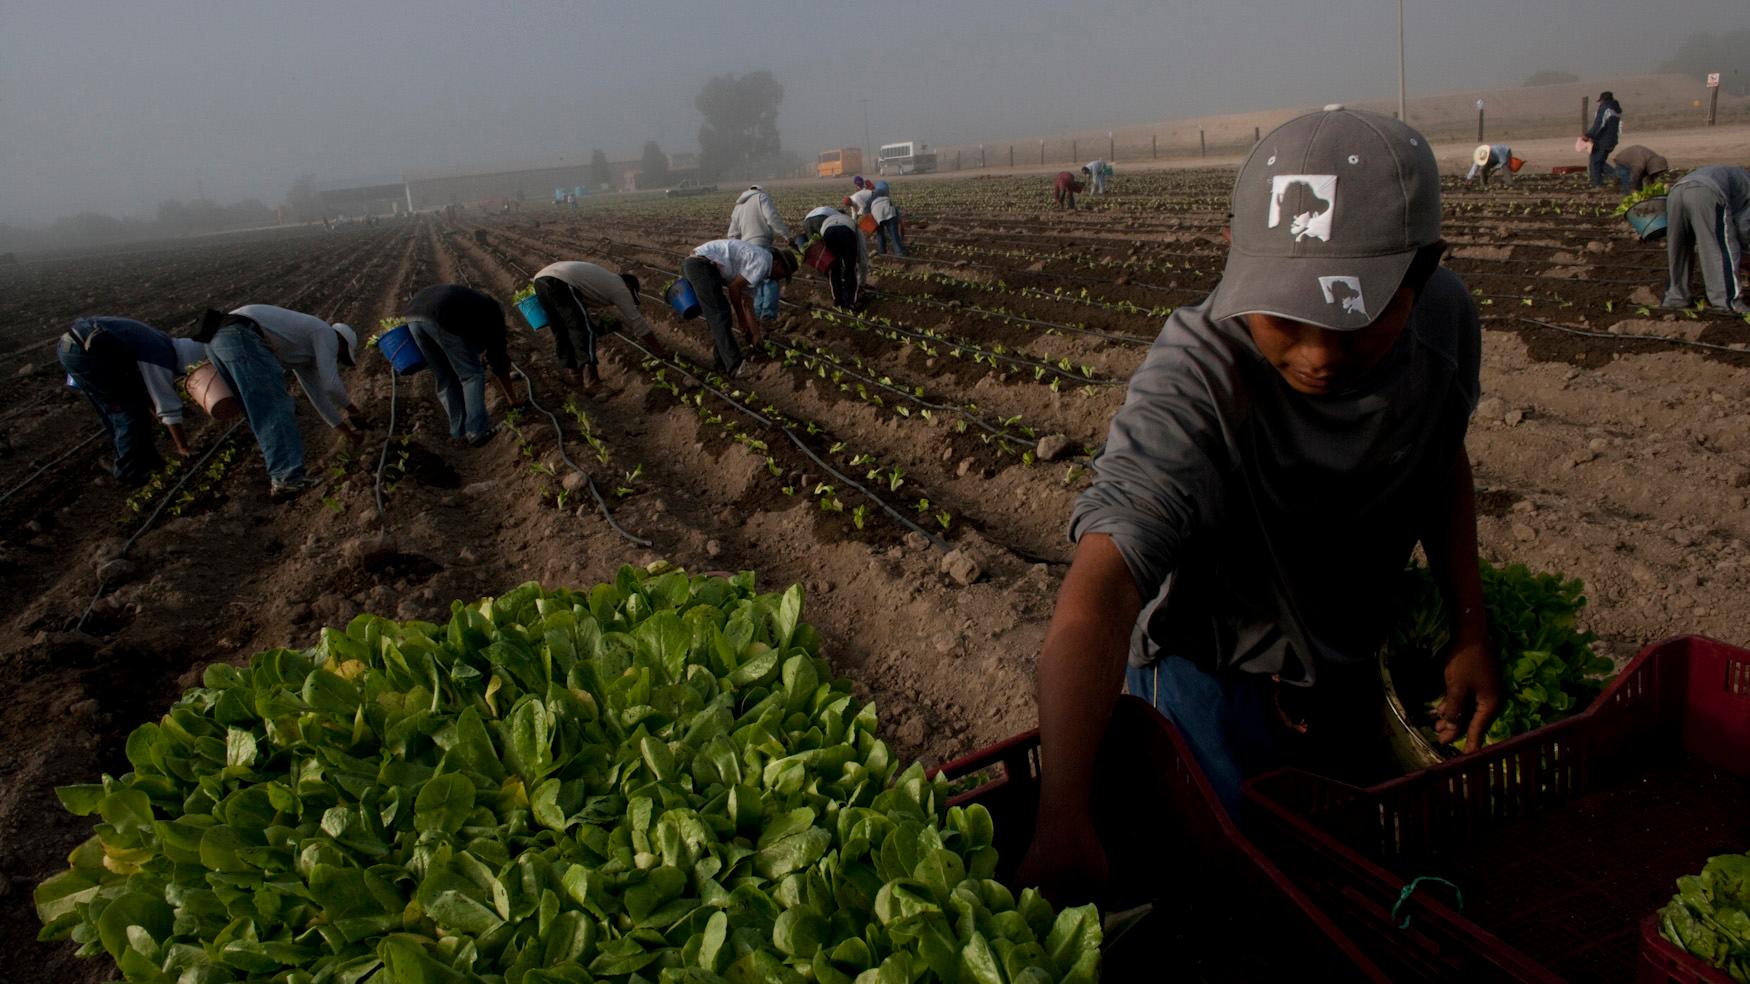 Nearly 20 percent of US food is imported. As imports of food has spiked, like lettuce from this farm in Guanajuato, Mexico, so have outbreaks of foodborne illnesses in the US.